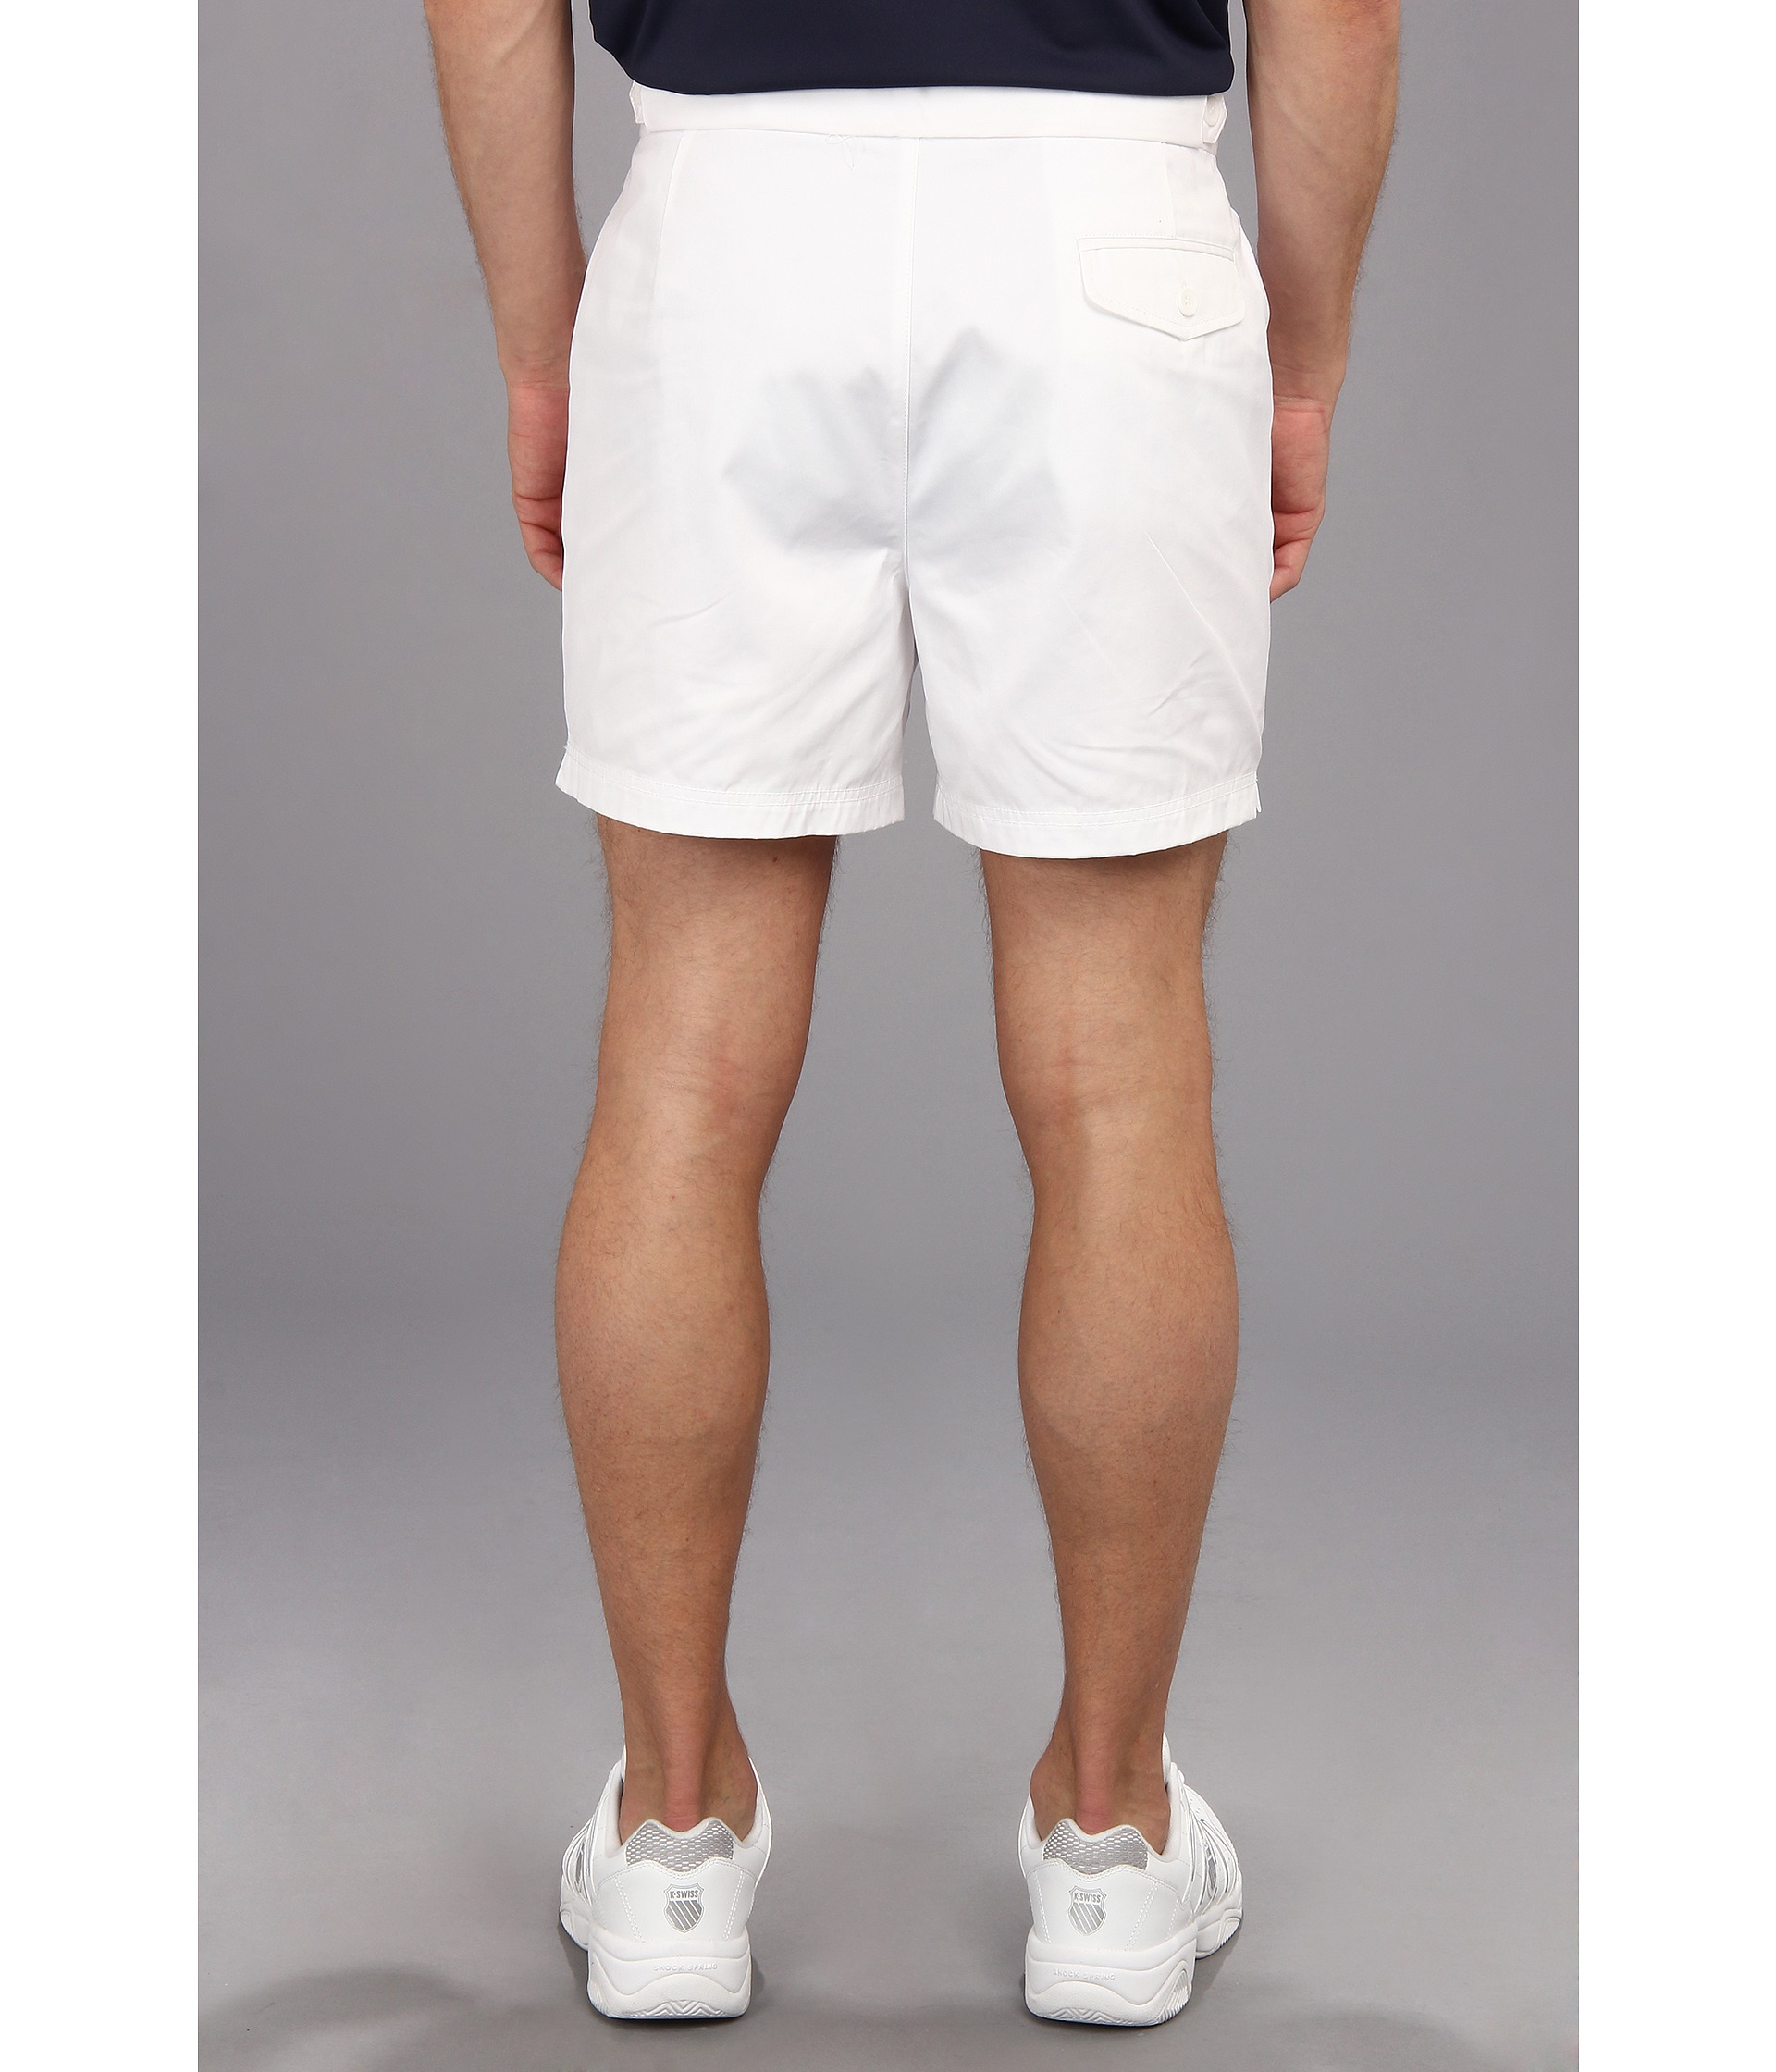 Fred Perry Tailored Tennis Shorts in White for Men - Lyst